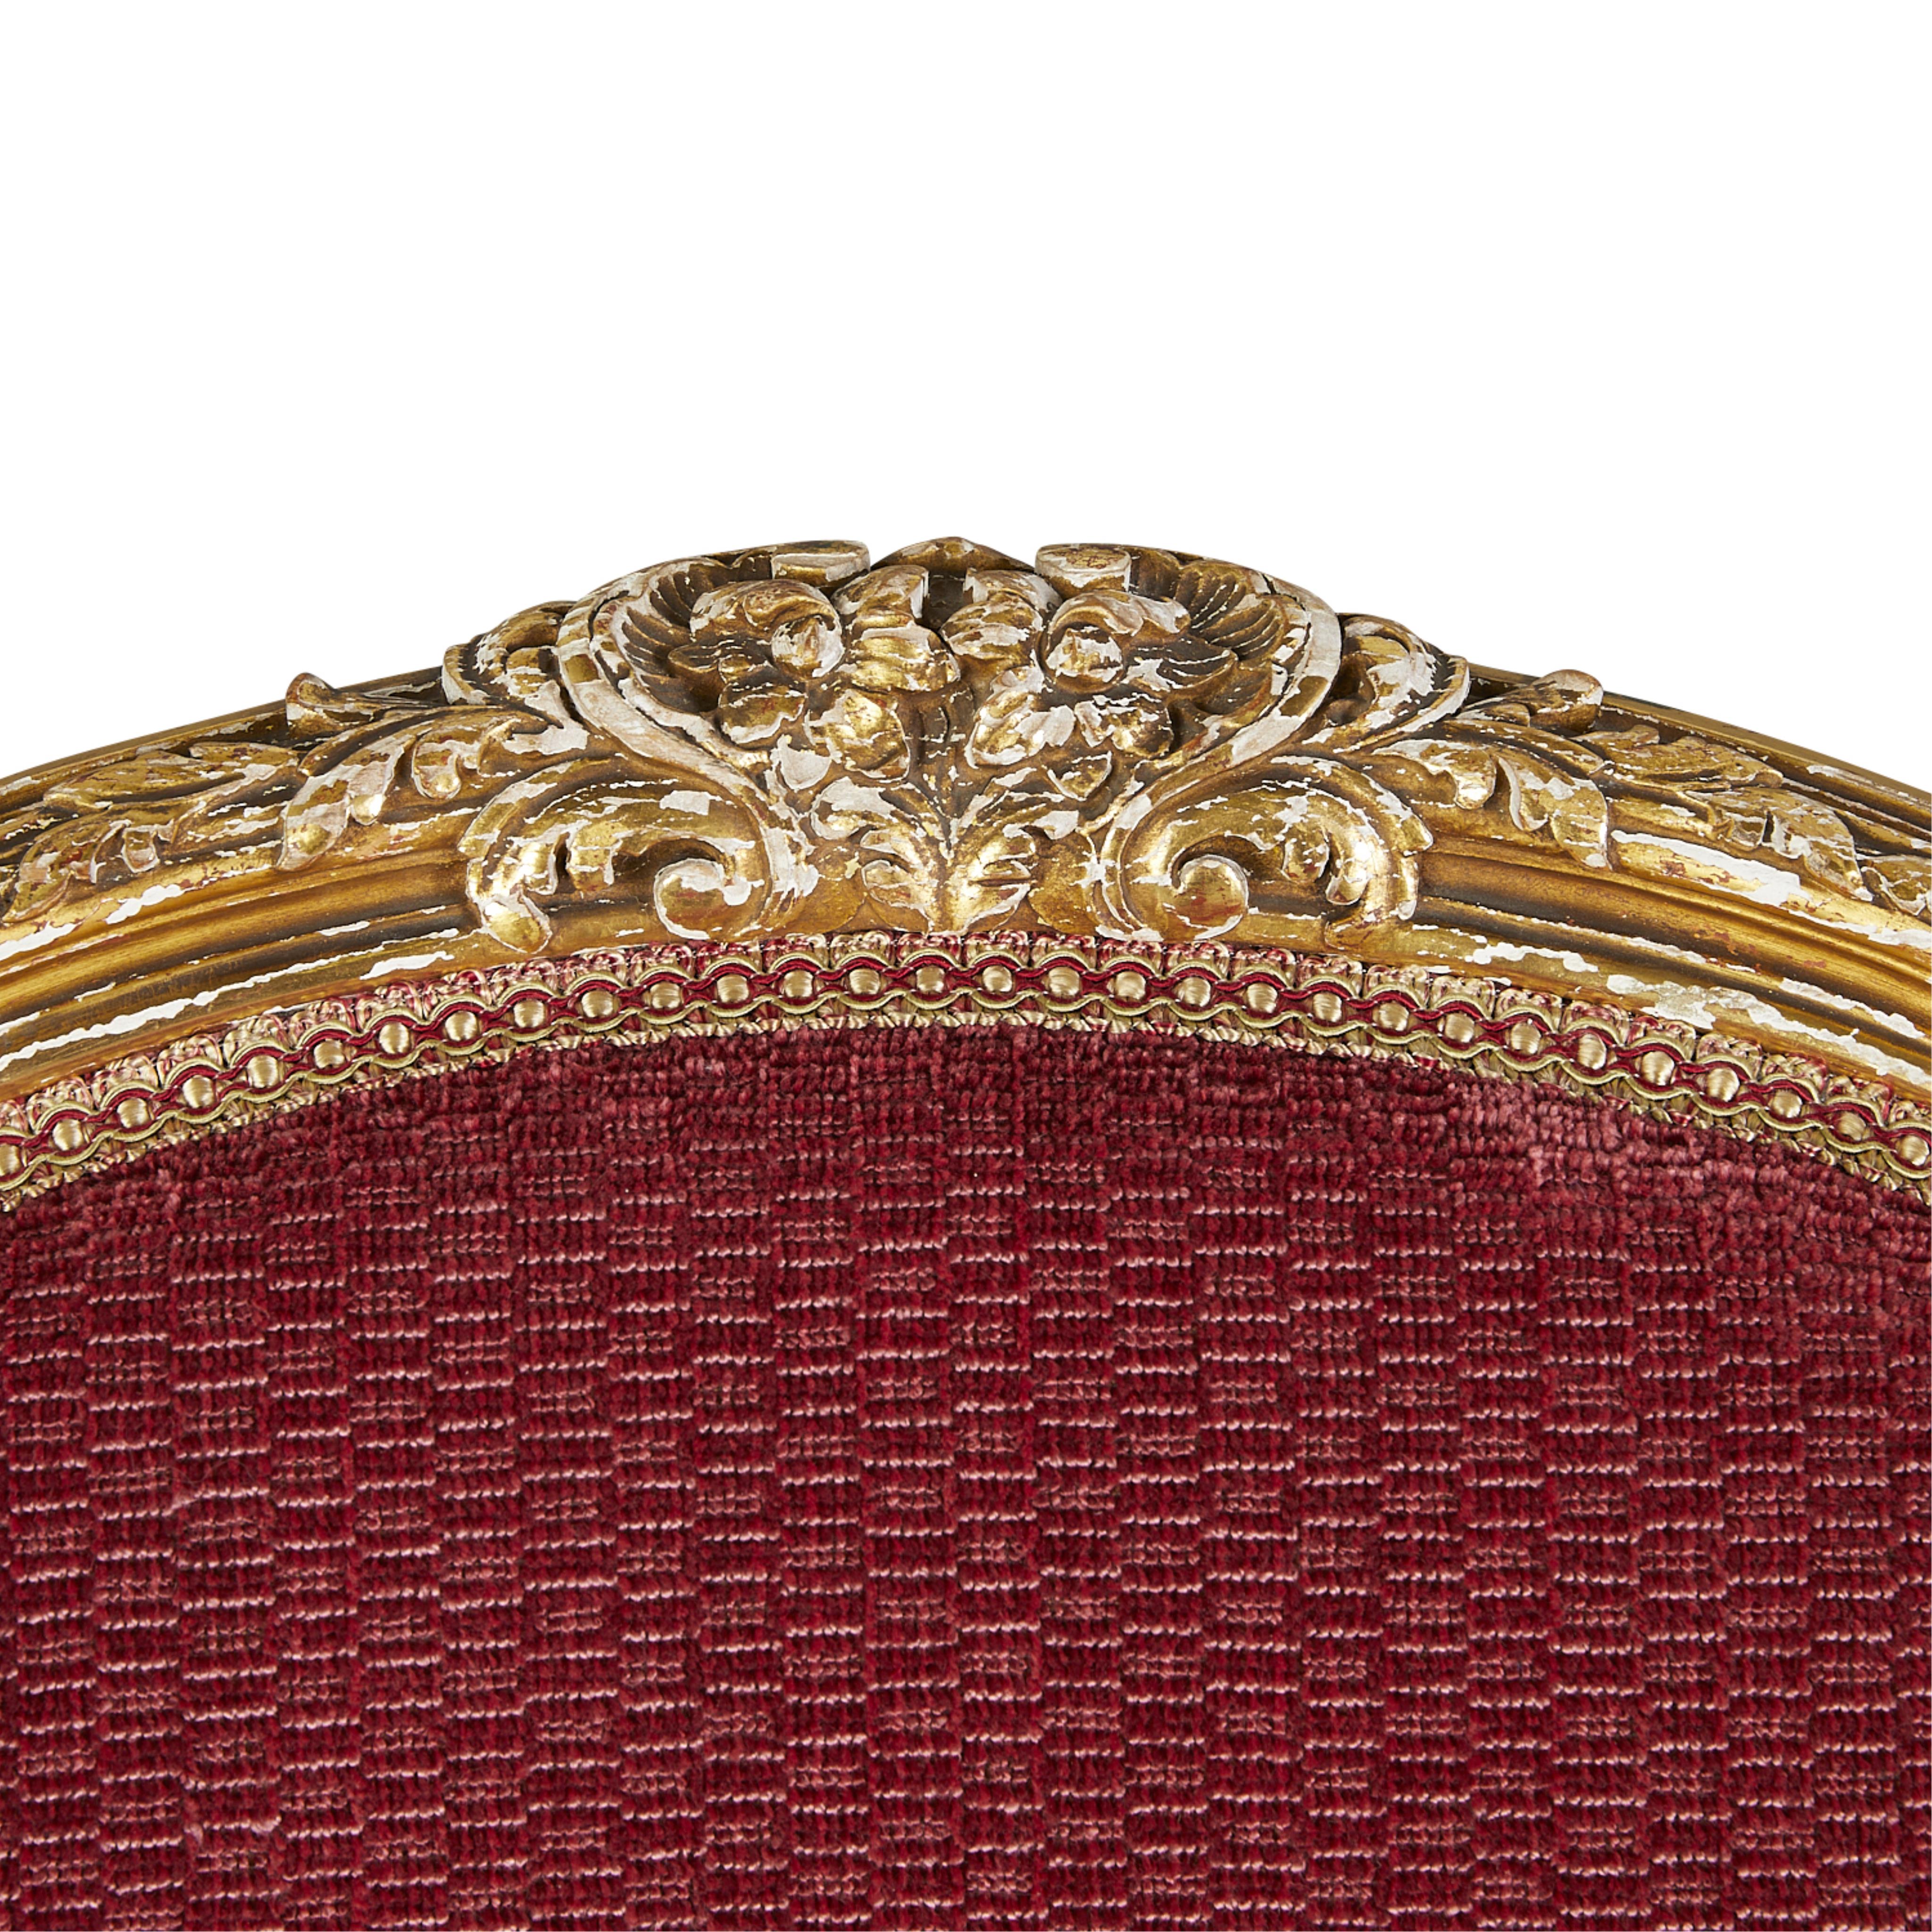 Pair of Louis XV Style Gilt Armchairs - Image 3 of 12